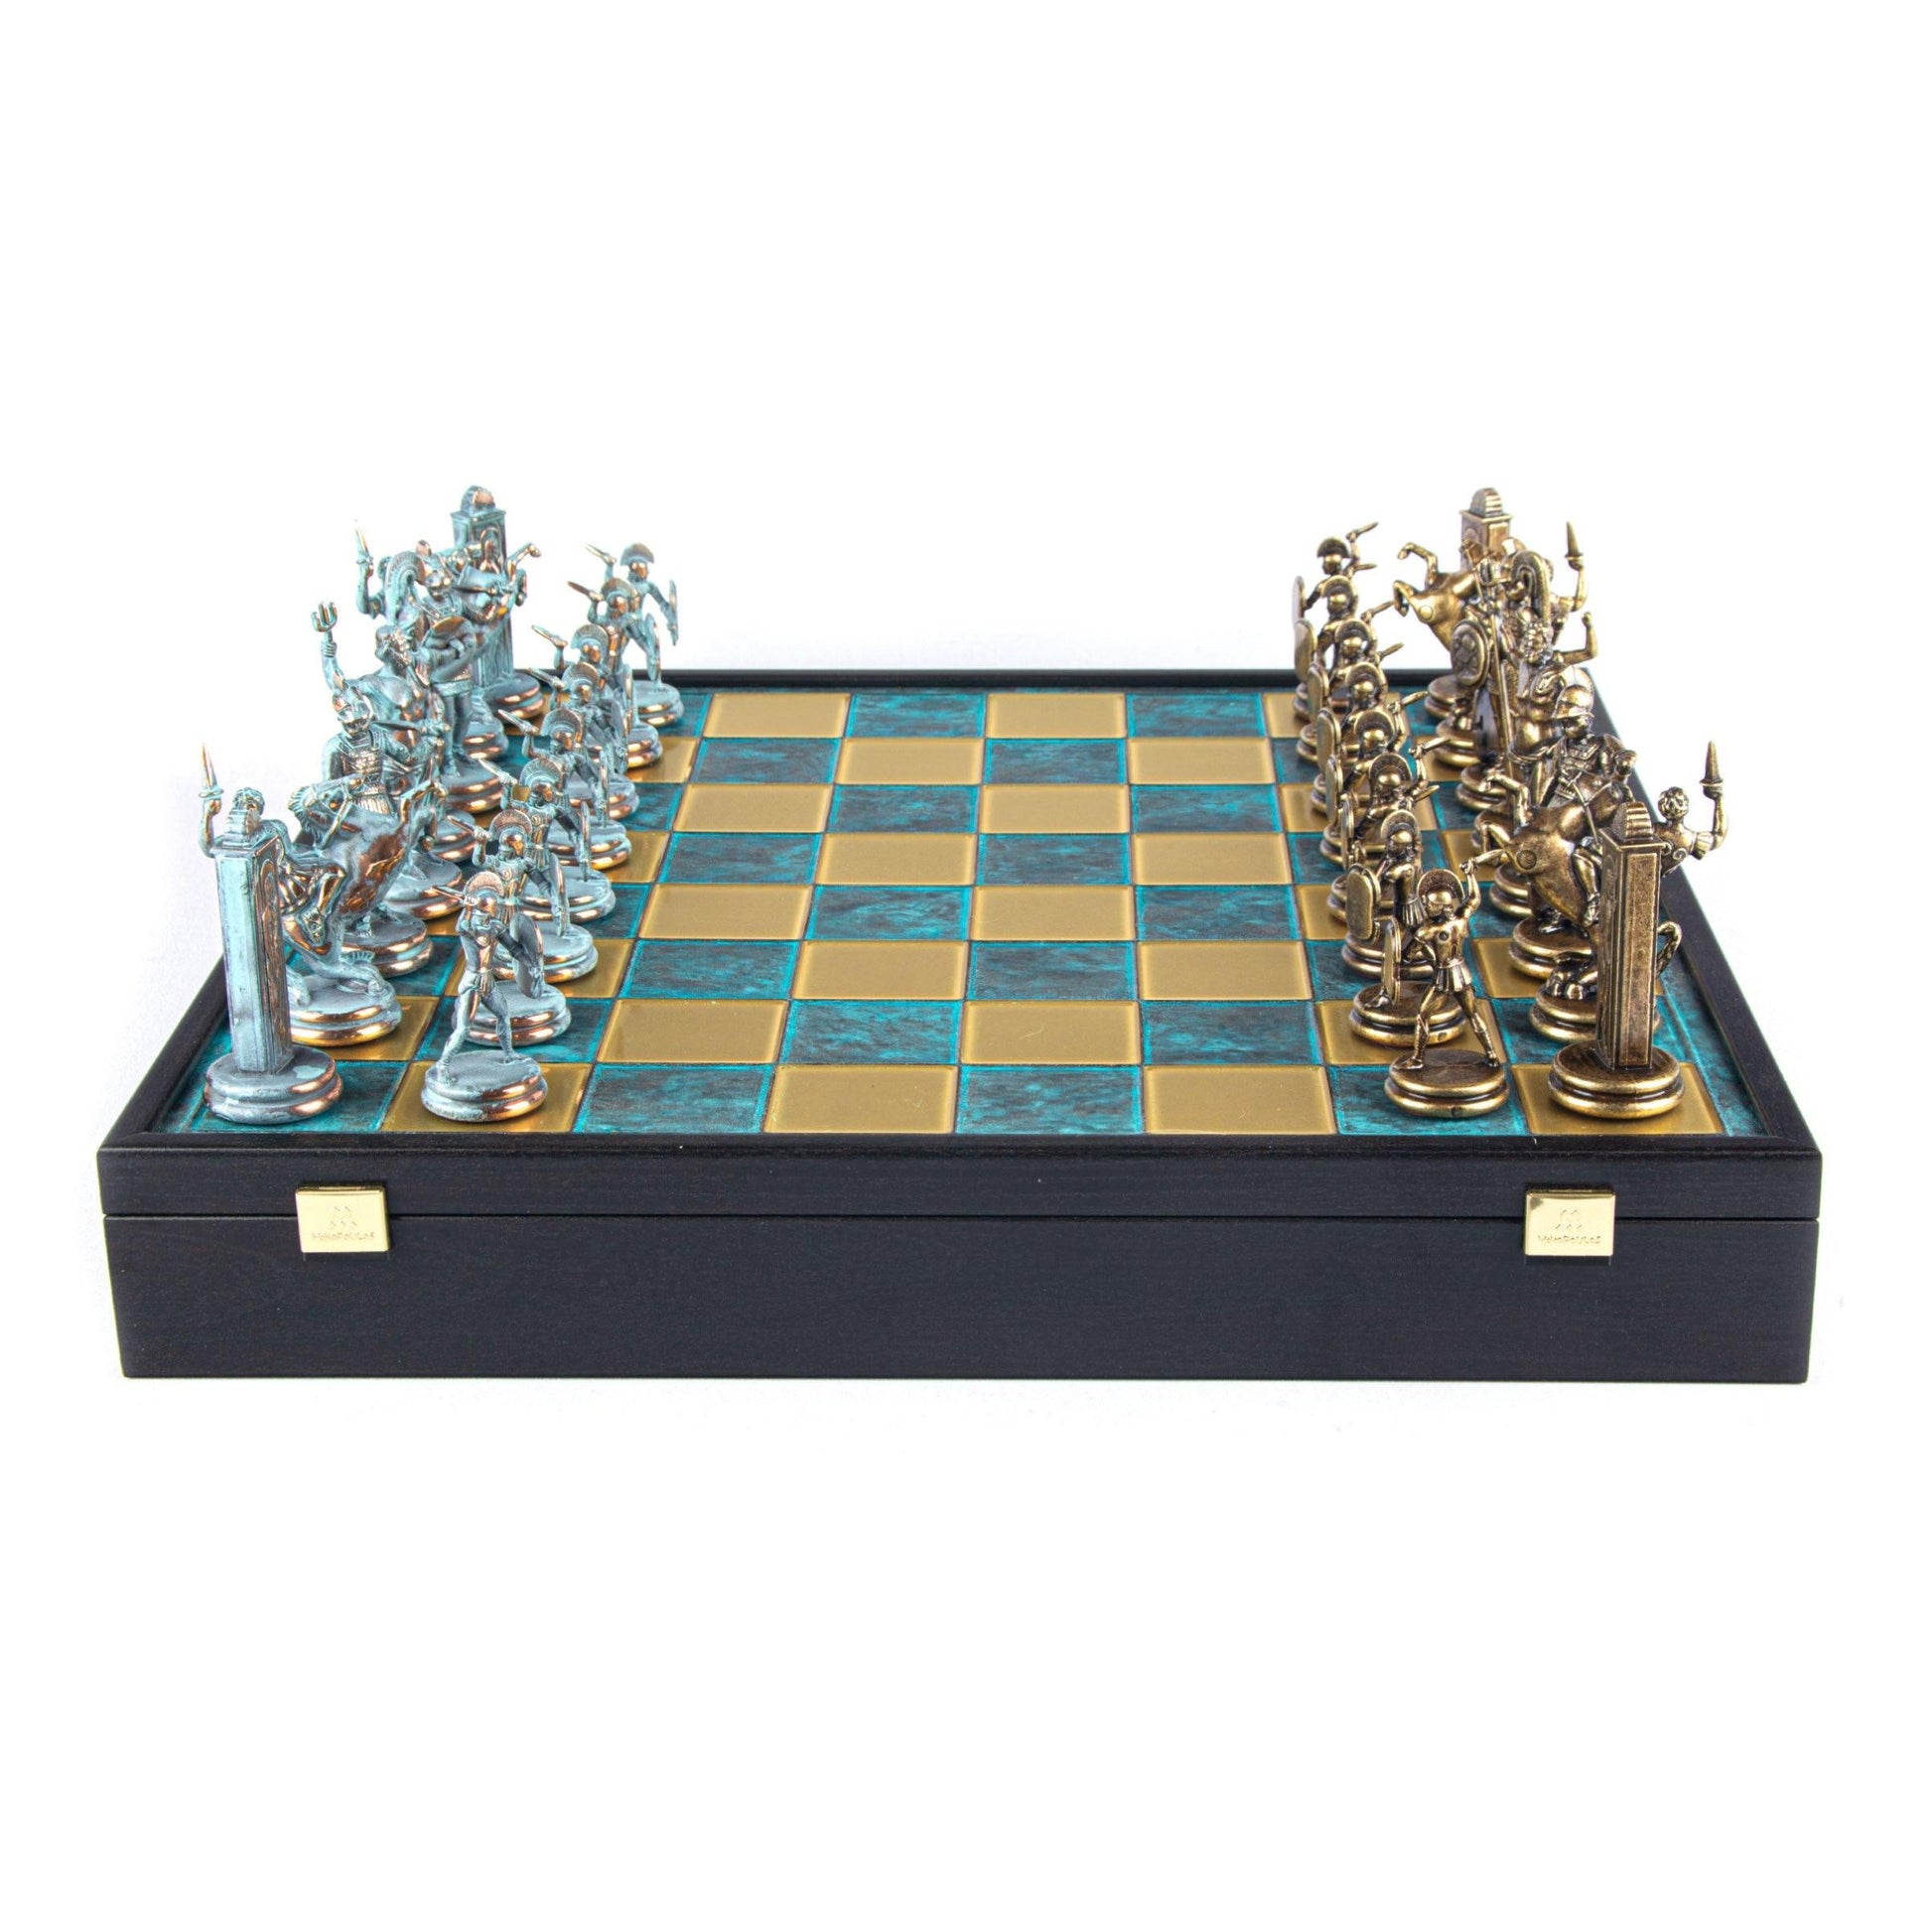 GREEK MYTHOLOGY CHESS SET in wooden box with blue/brown - LAZADO